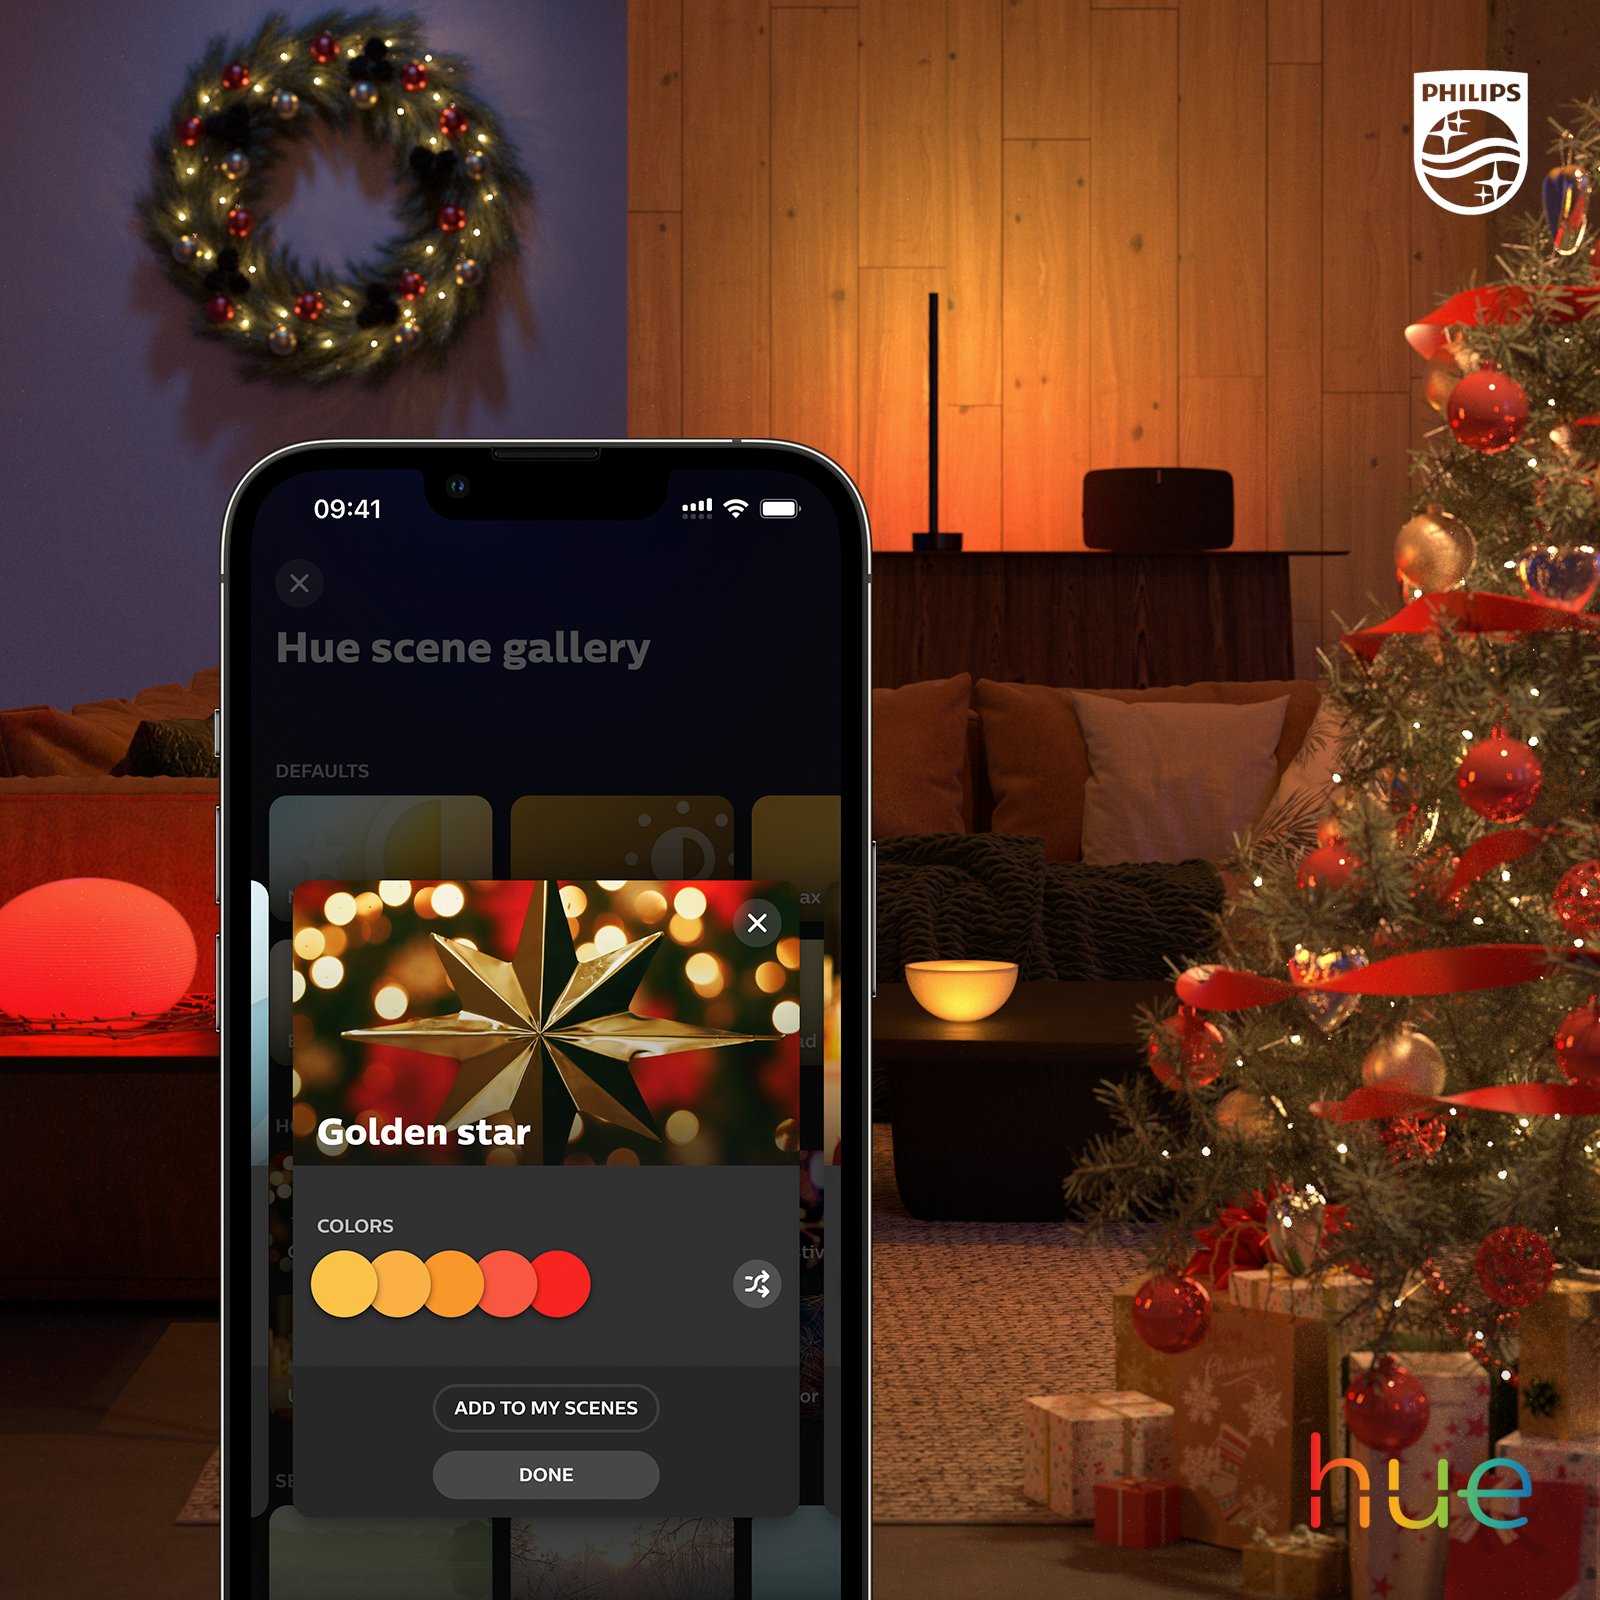 Philips Hue on Twitter: an early Christmas present? 🎁 Check out our 7 new holiday-themed scenes, specially designed give your home a festive feel. Try them out in the Hue